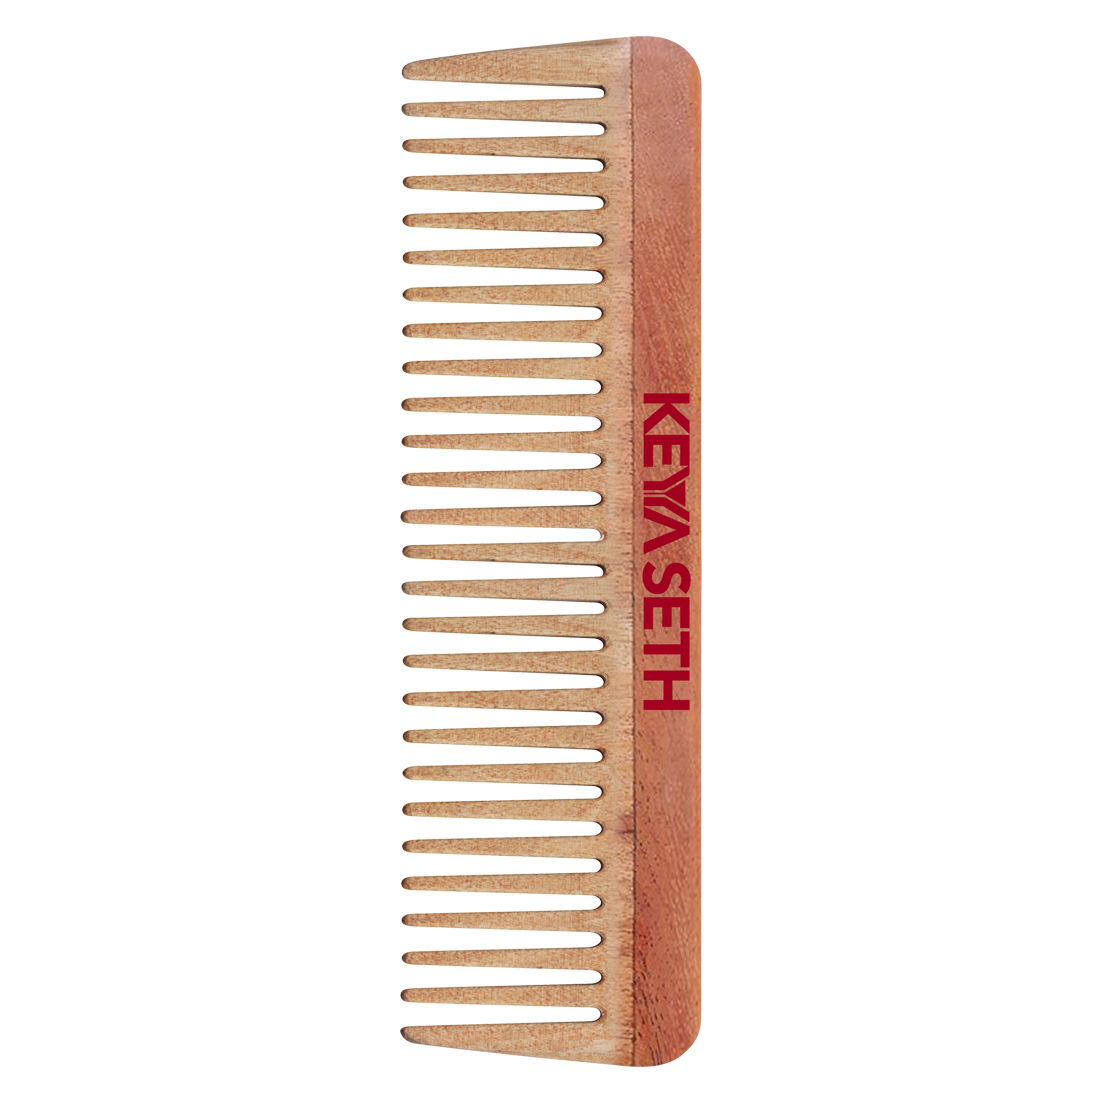 Keya Seth Neem Wooden Comb Wide Tooth For Hair Growth For Men & Women All Purpose - Large